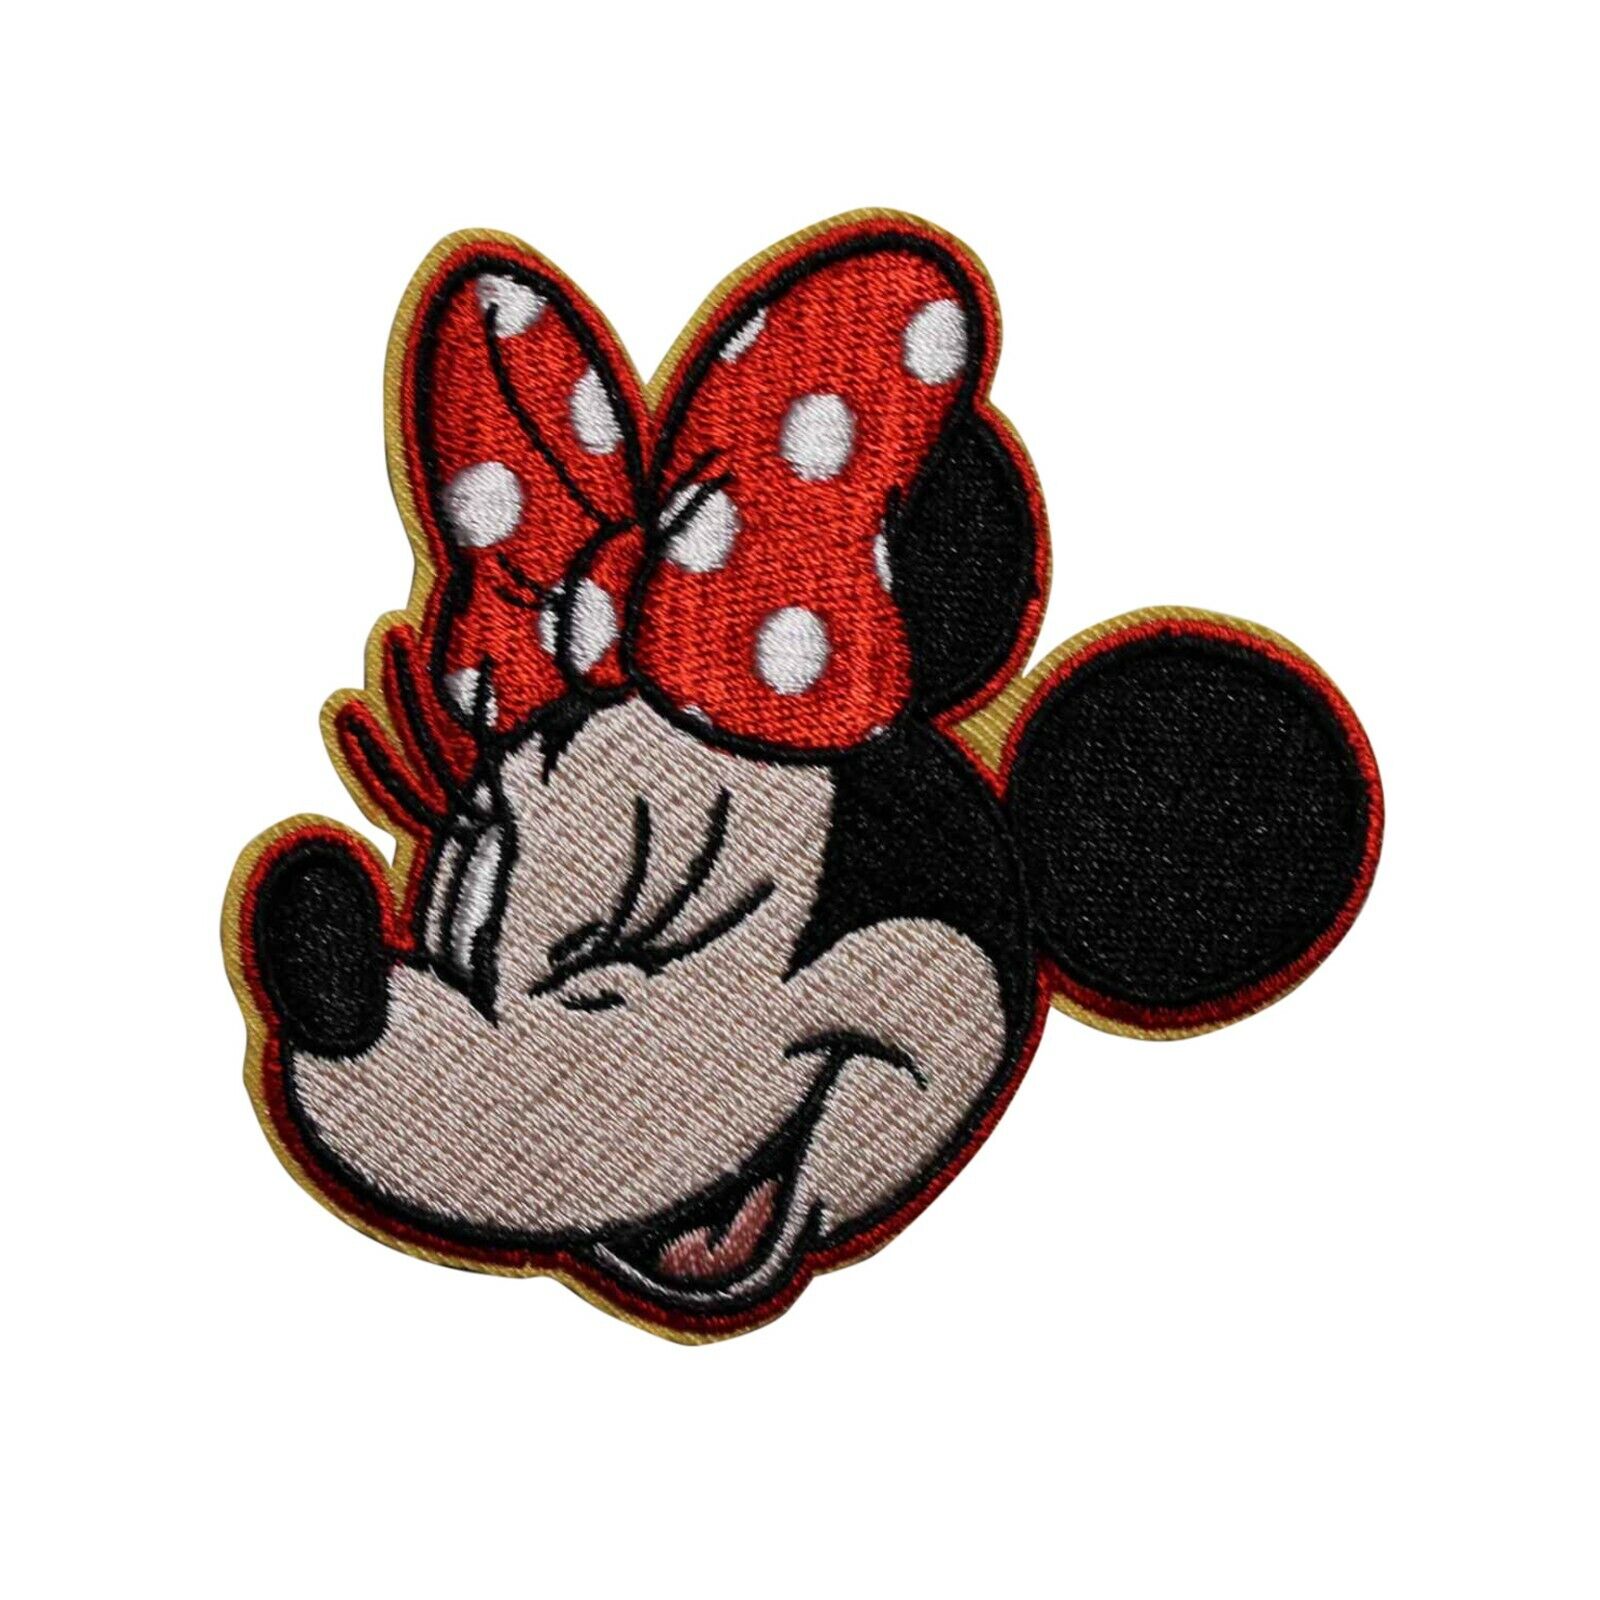 Disney Minnie Mouse Embroidered Iron On Patch - LICENSED 008-I